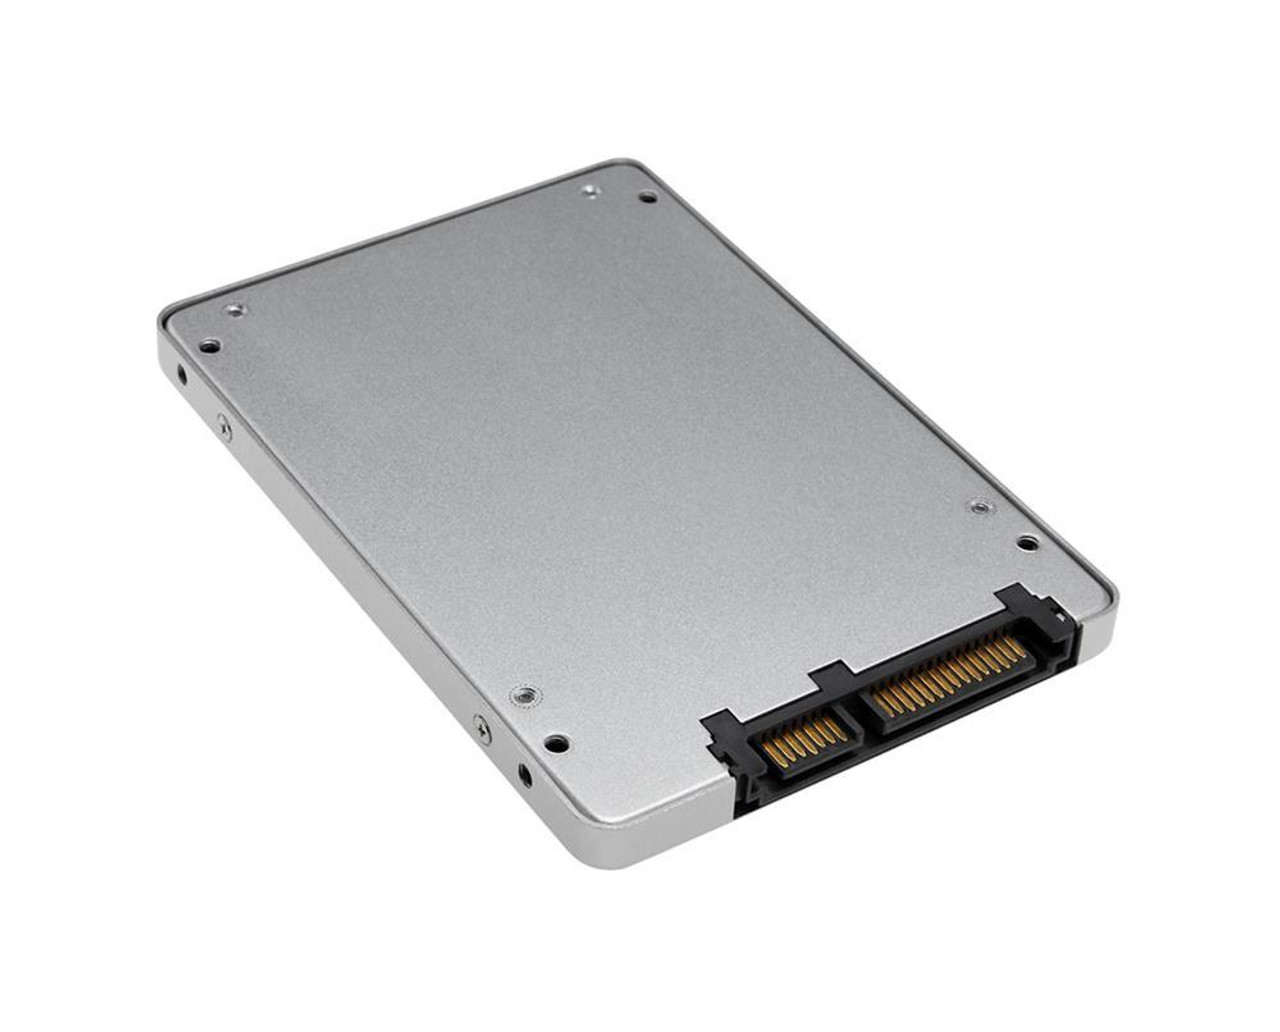 03B0100021900 ASUS 256GB SATA 6Gbps 2.5-inch Internal Solid State Drive (SSD) for UX303LB